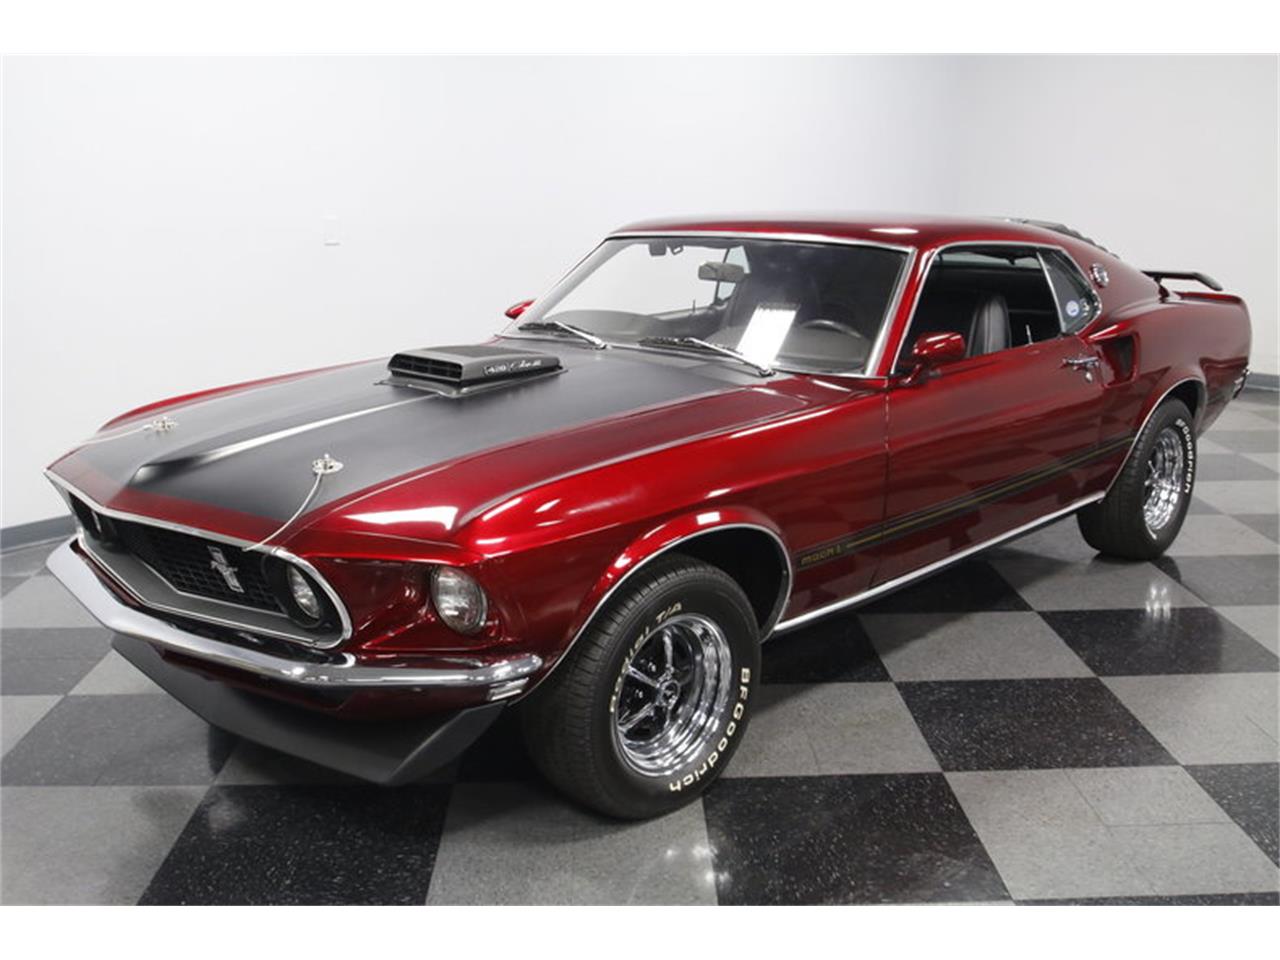 1969 Ford Mustang Mach 1 for Sale | ClassicCars.com | CC-1076546